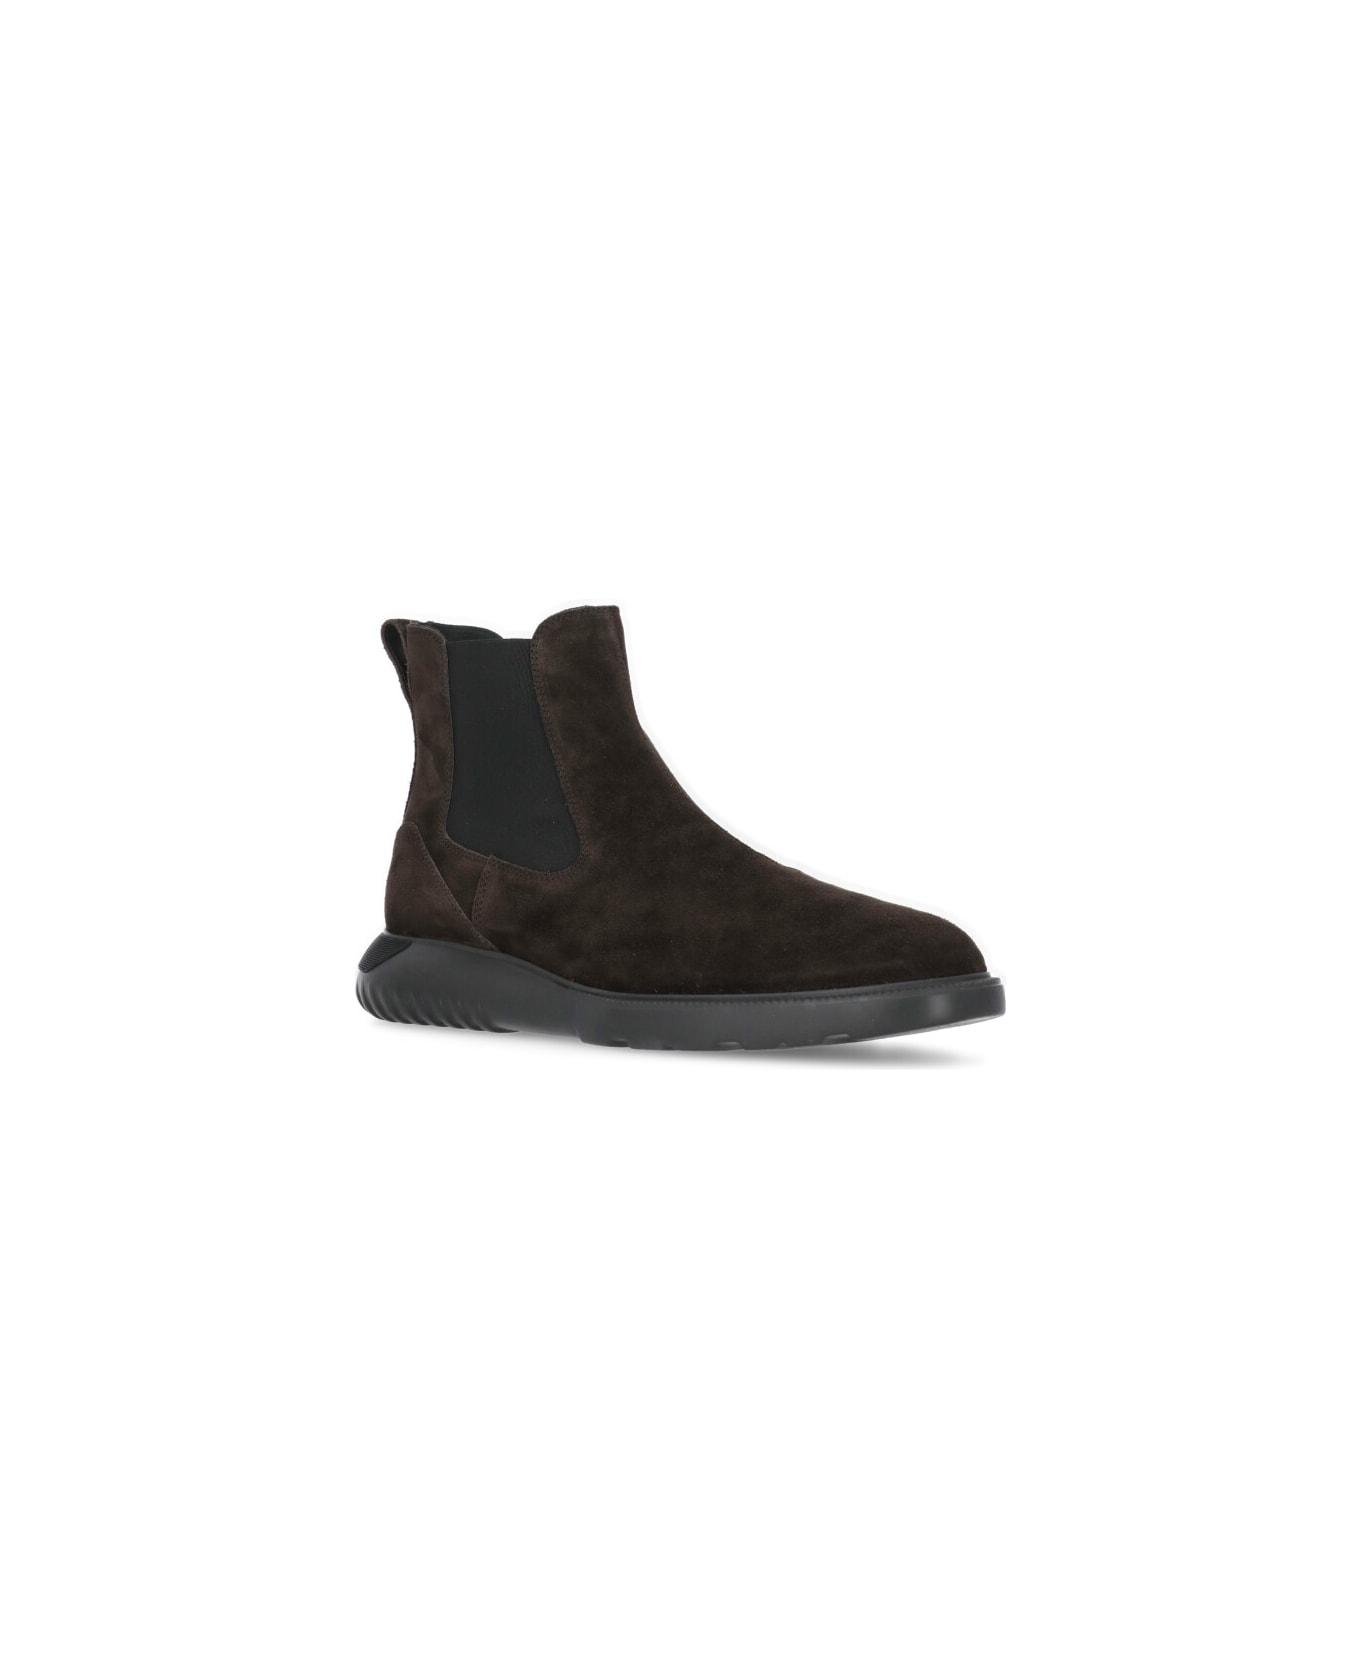 Hogan Round Toe Ankle Boots - Brown ブーツ